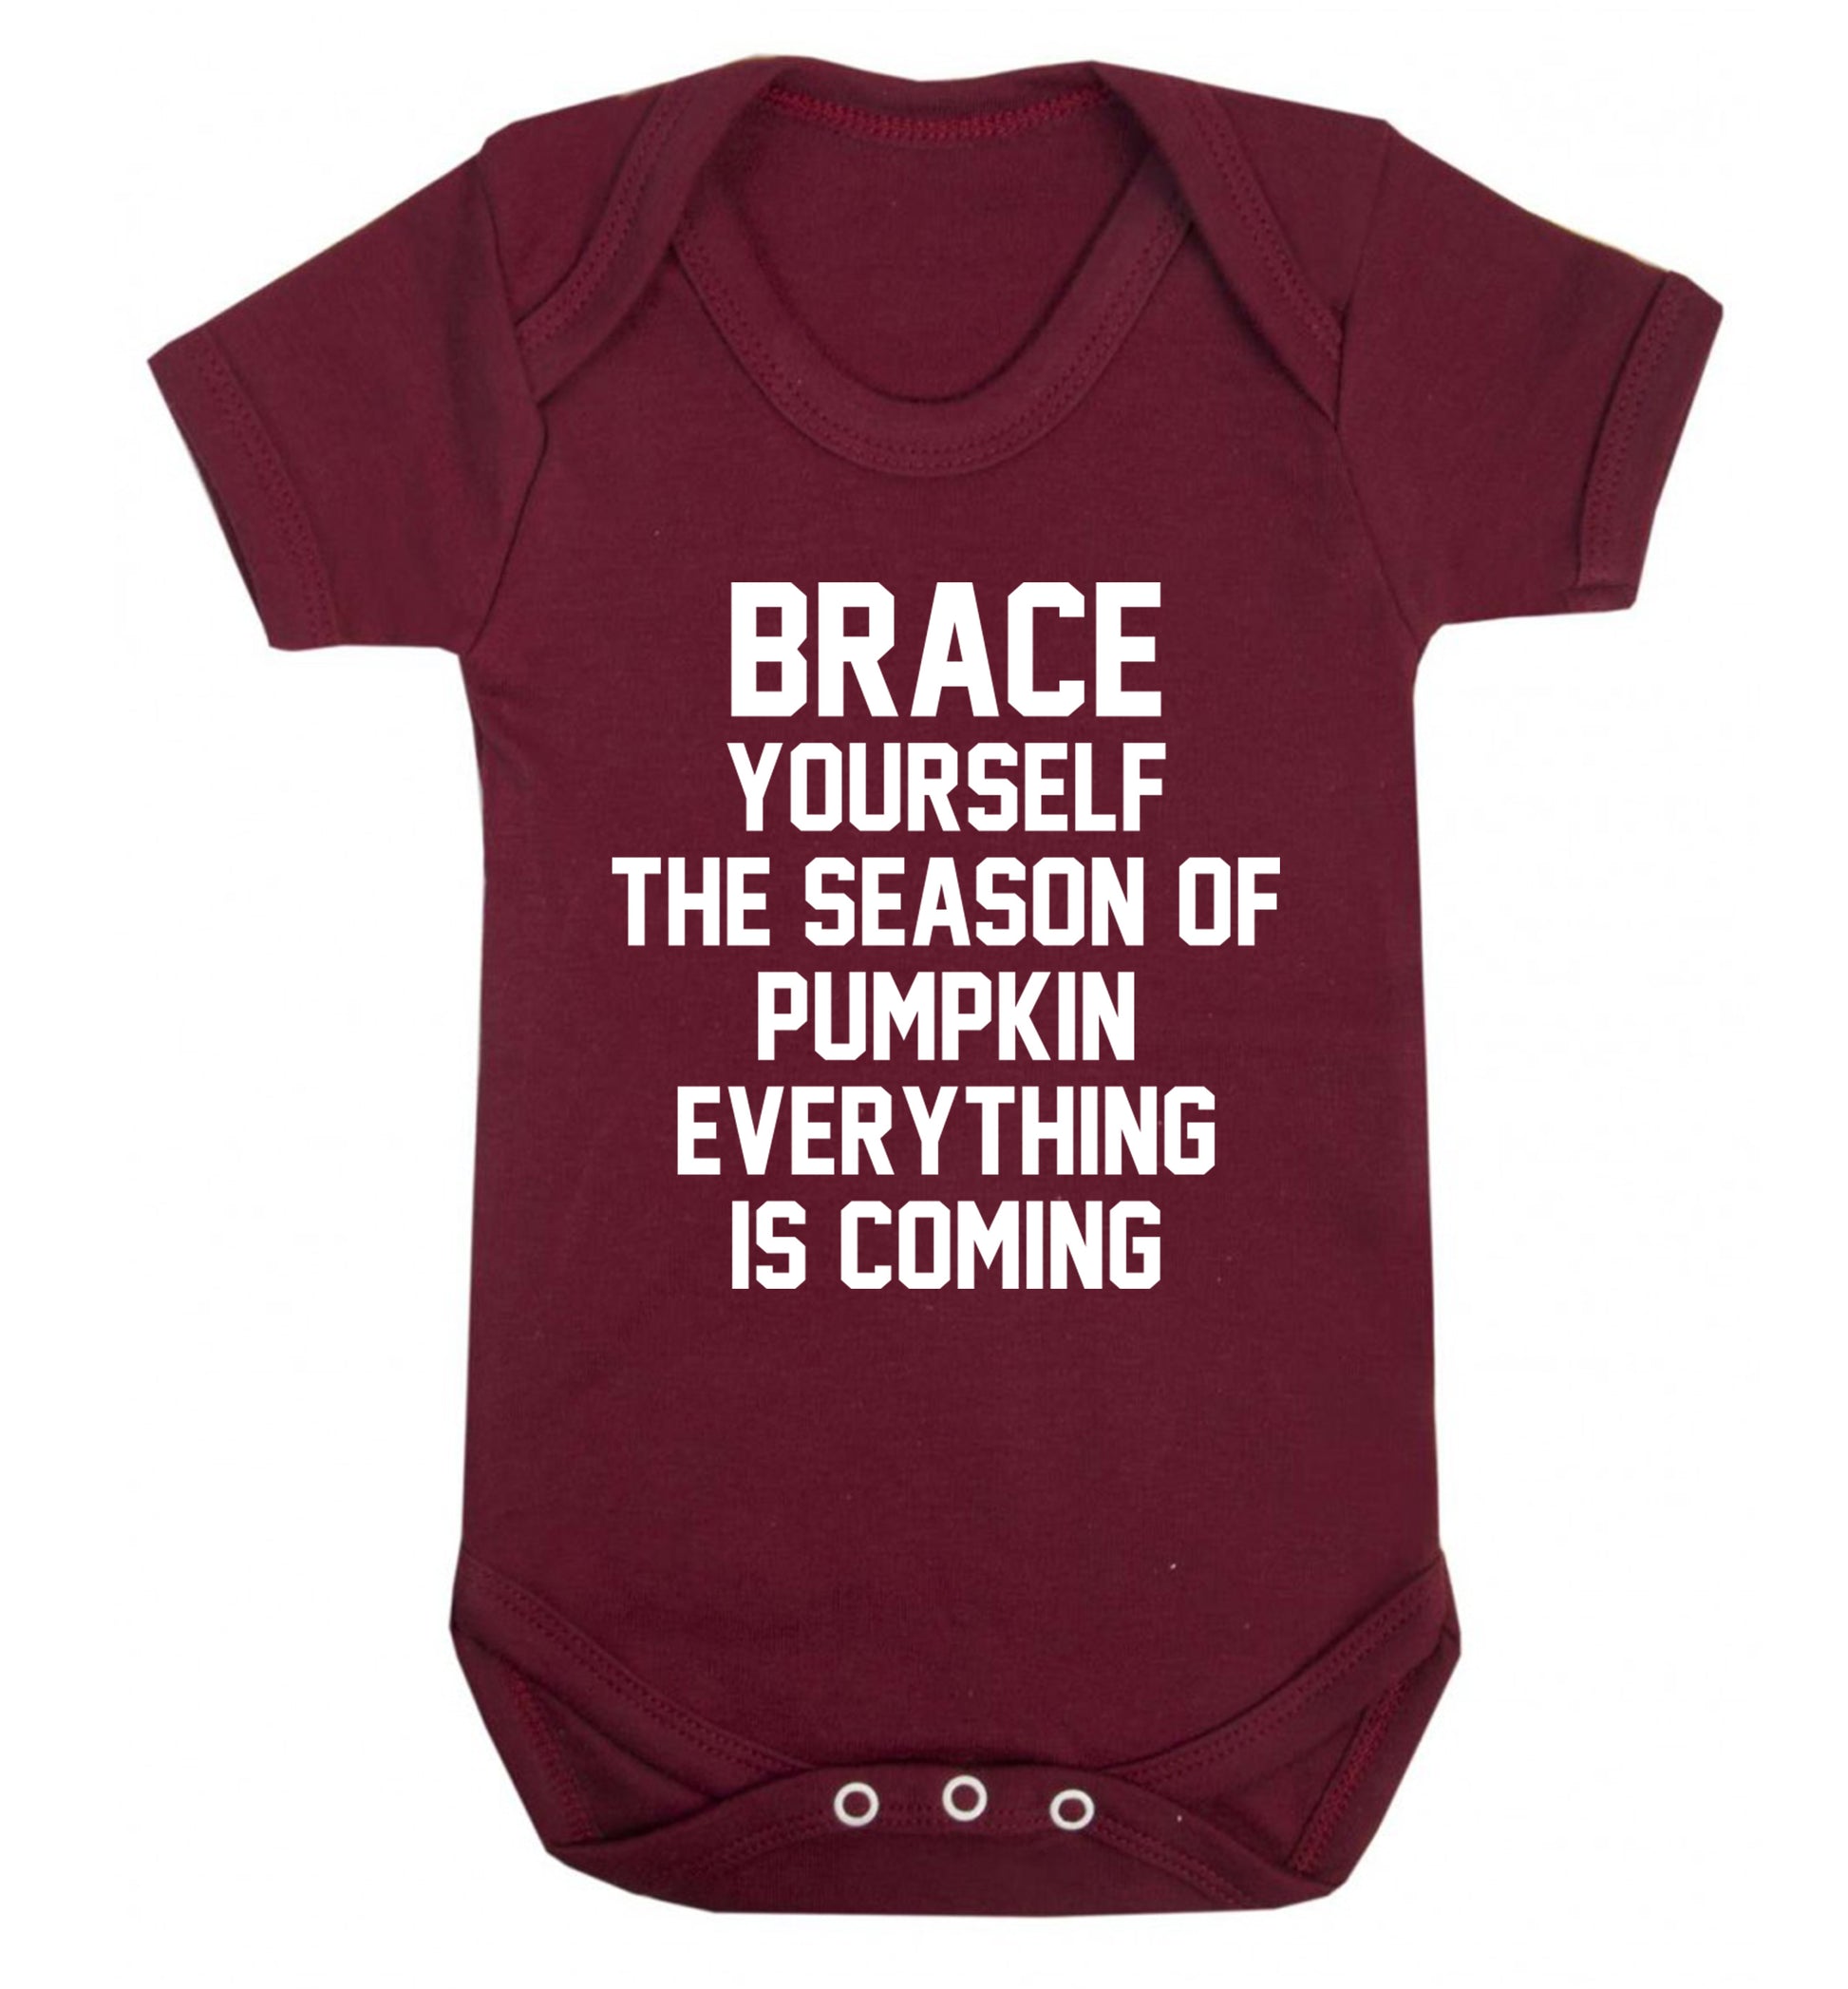 Brace yourself the season of pumpkin everything is coming Baby Vest maroon 18-24 months